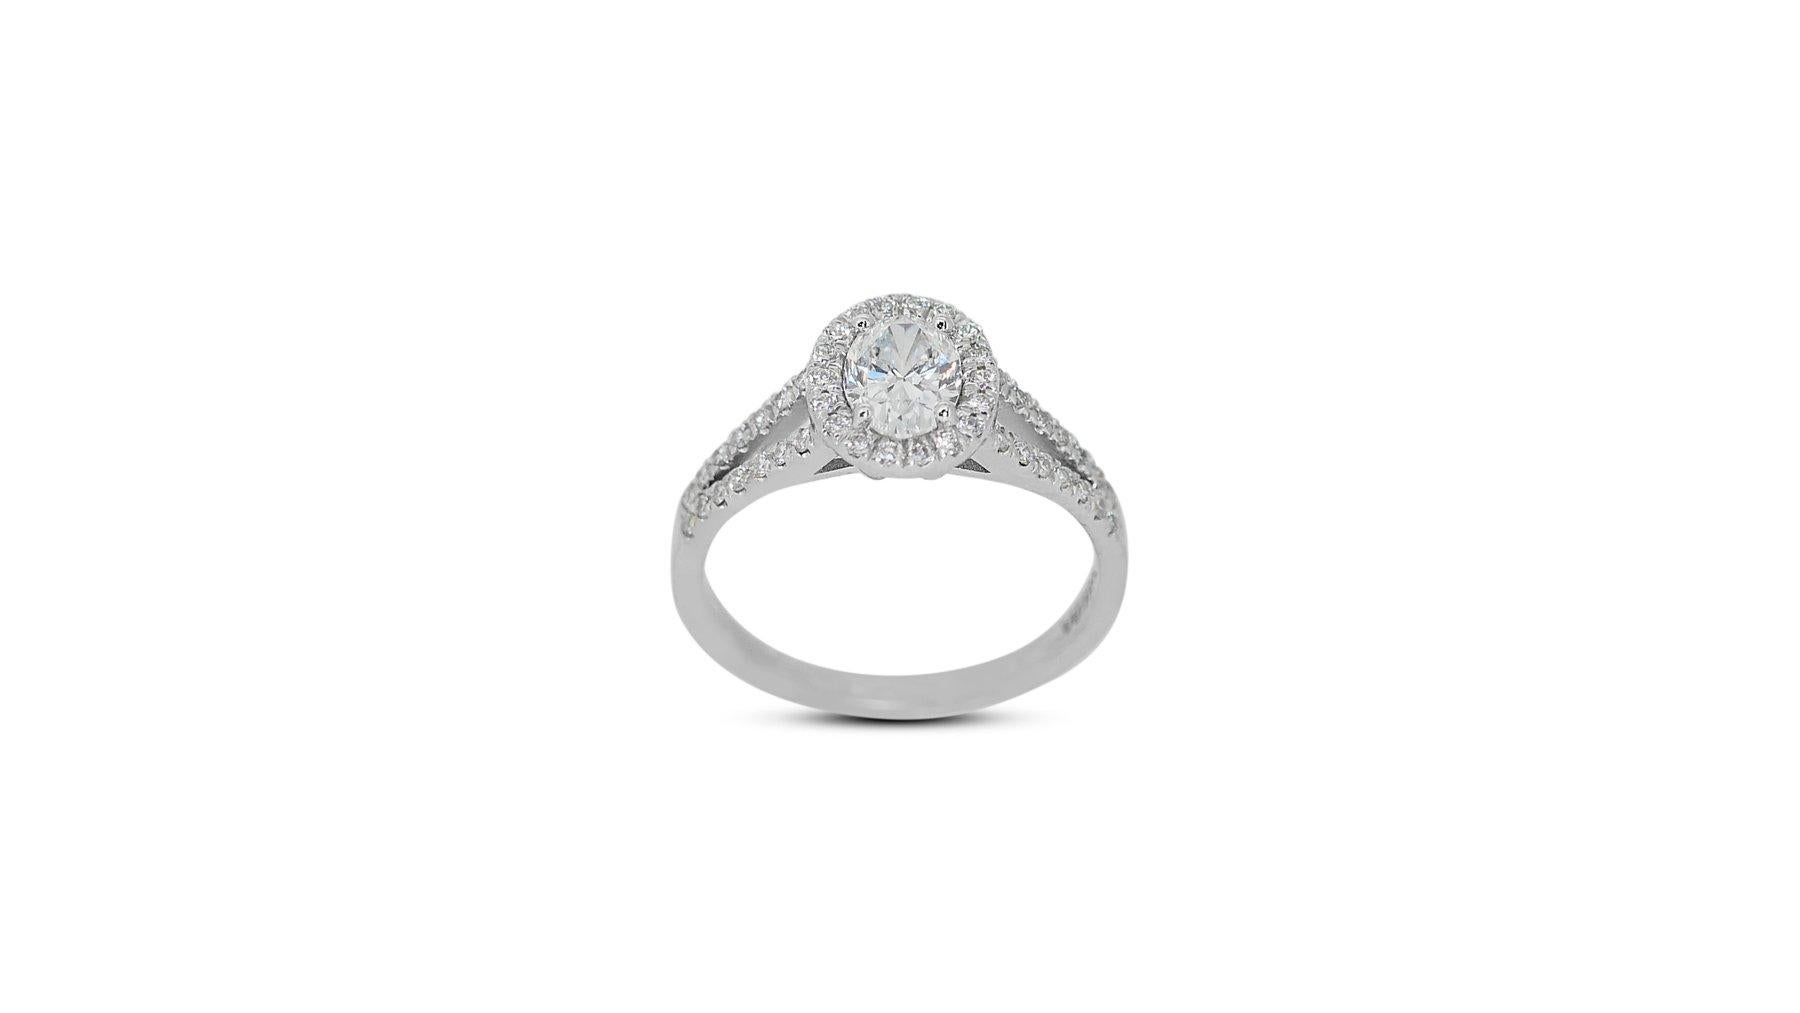 Glamorous 1.30ct Oval Diamond Halo Ring in 18K White Gold - GIA Certified

Elevate your style with this exquisite 18K white gold diamond halo ring, featuring a breathtaking 1.00-carat oval diamond at its center. Surrounding the central diamond are